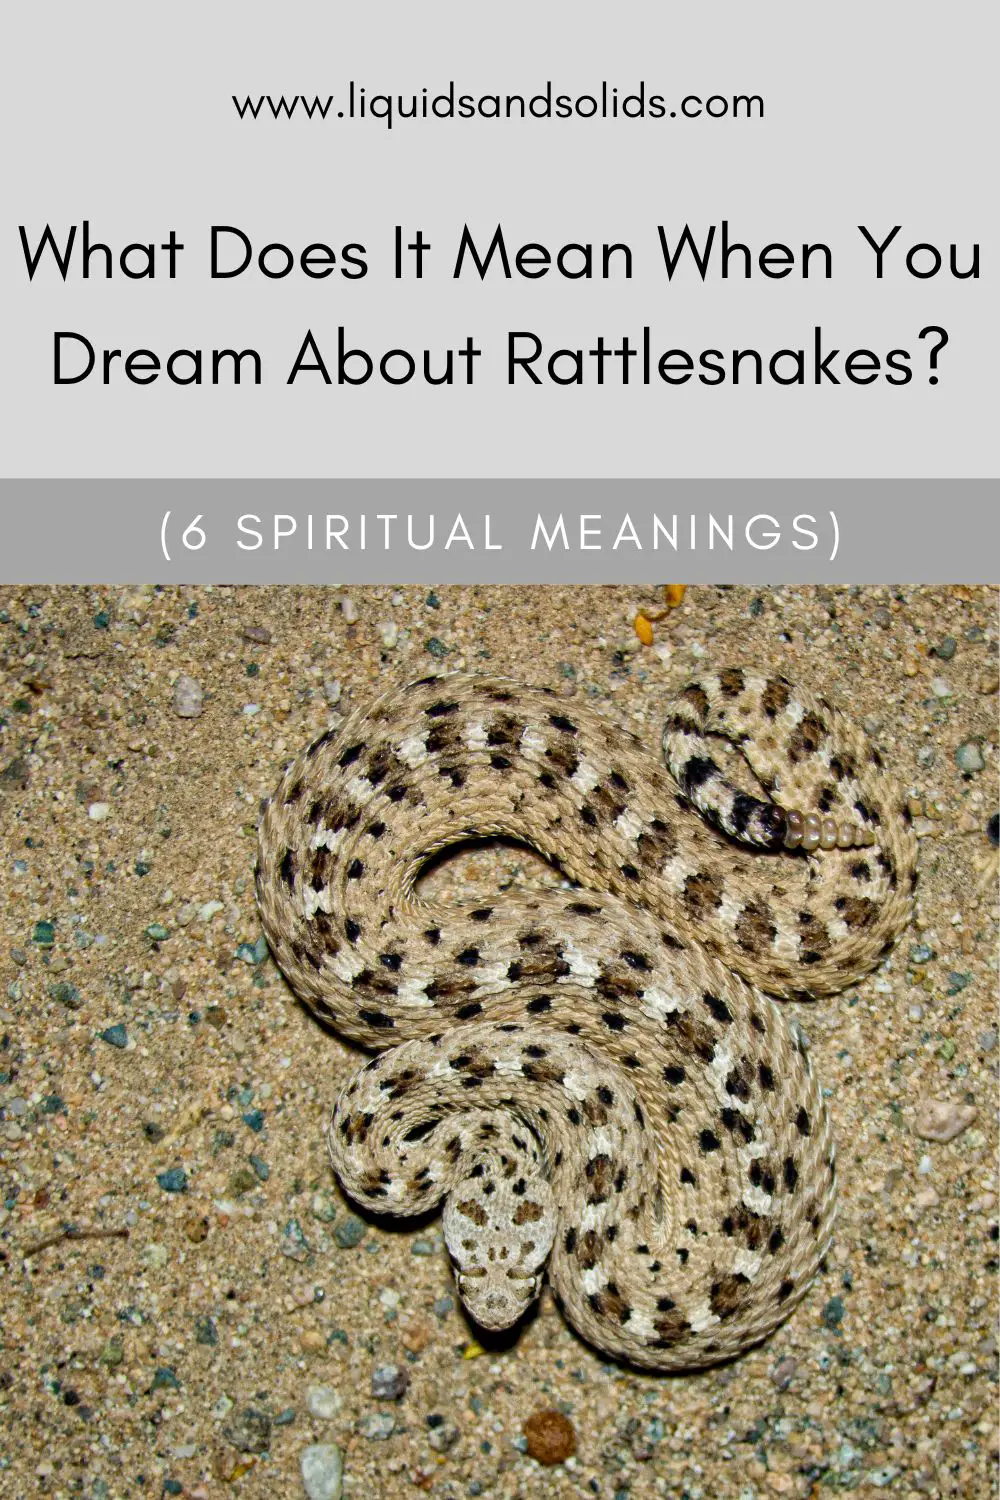 What Is A Rattlesnake?